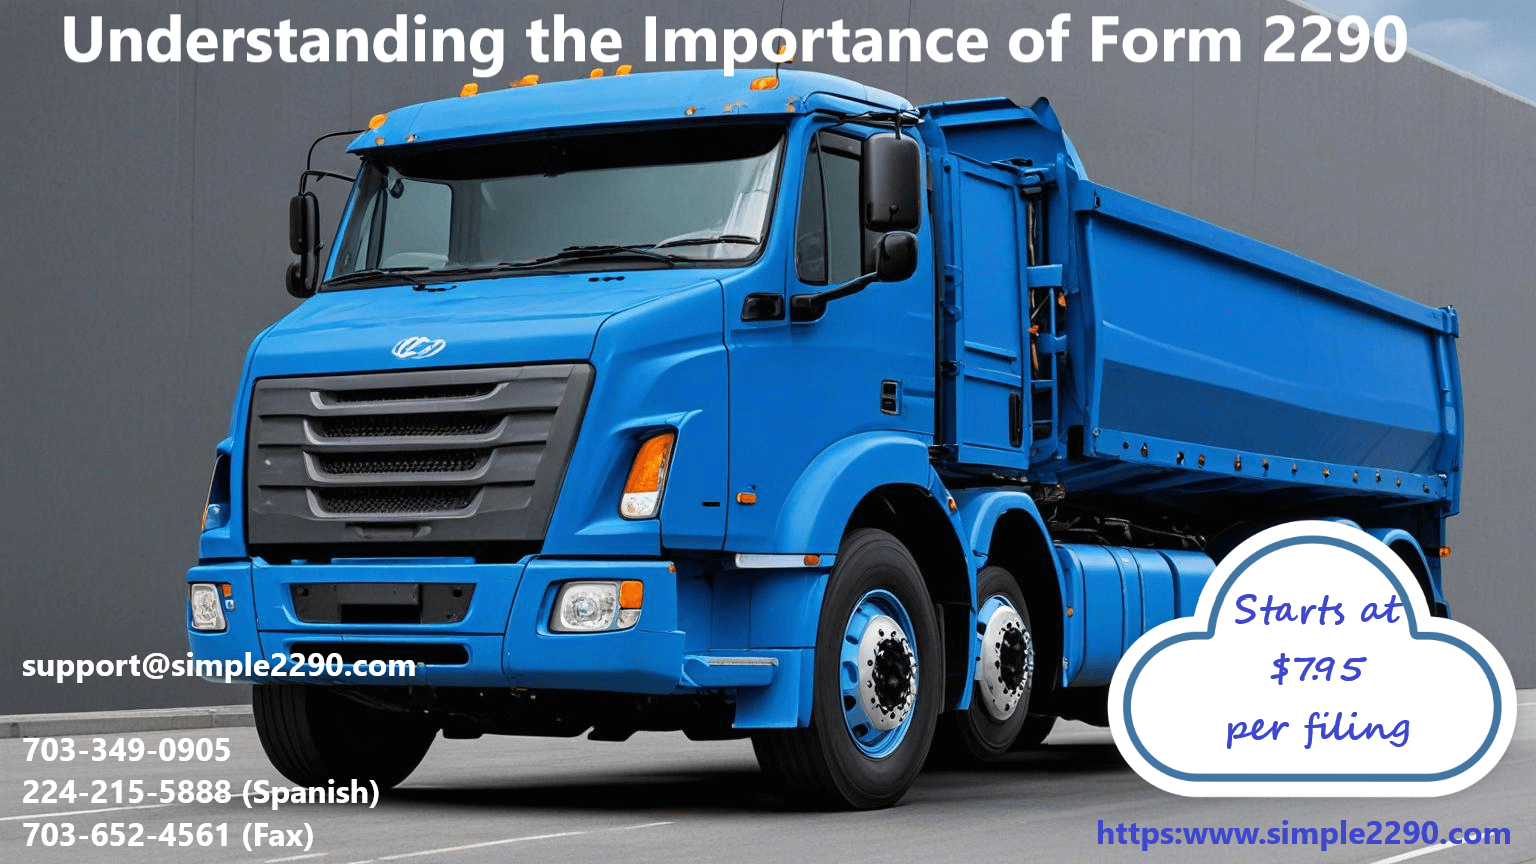 Understanding the Importance of Form 2290